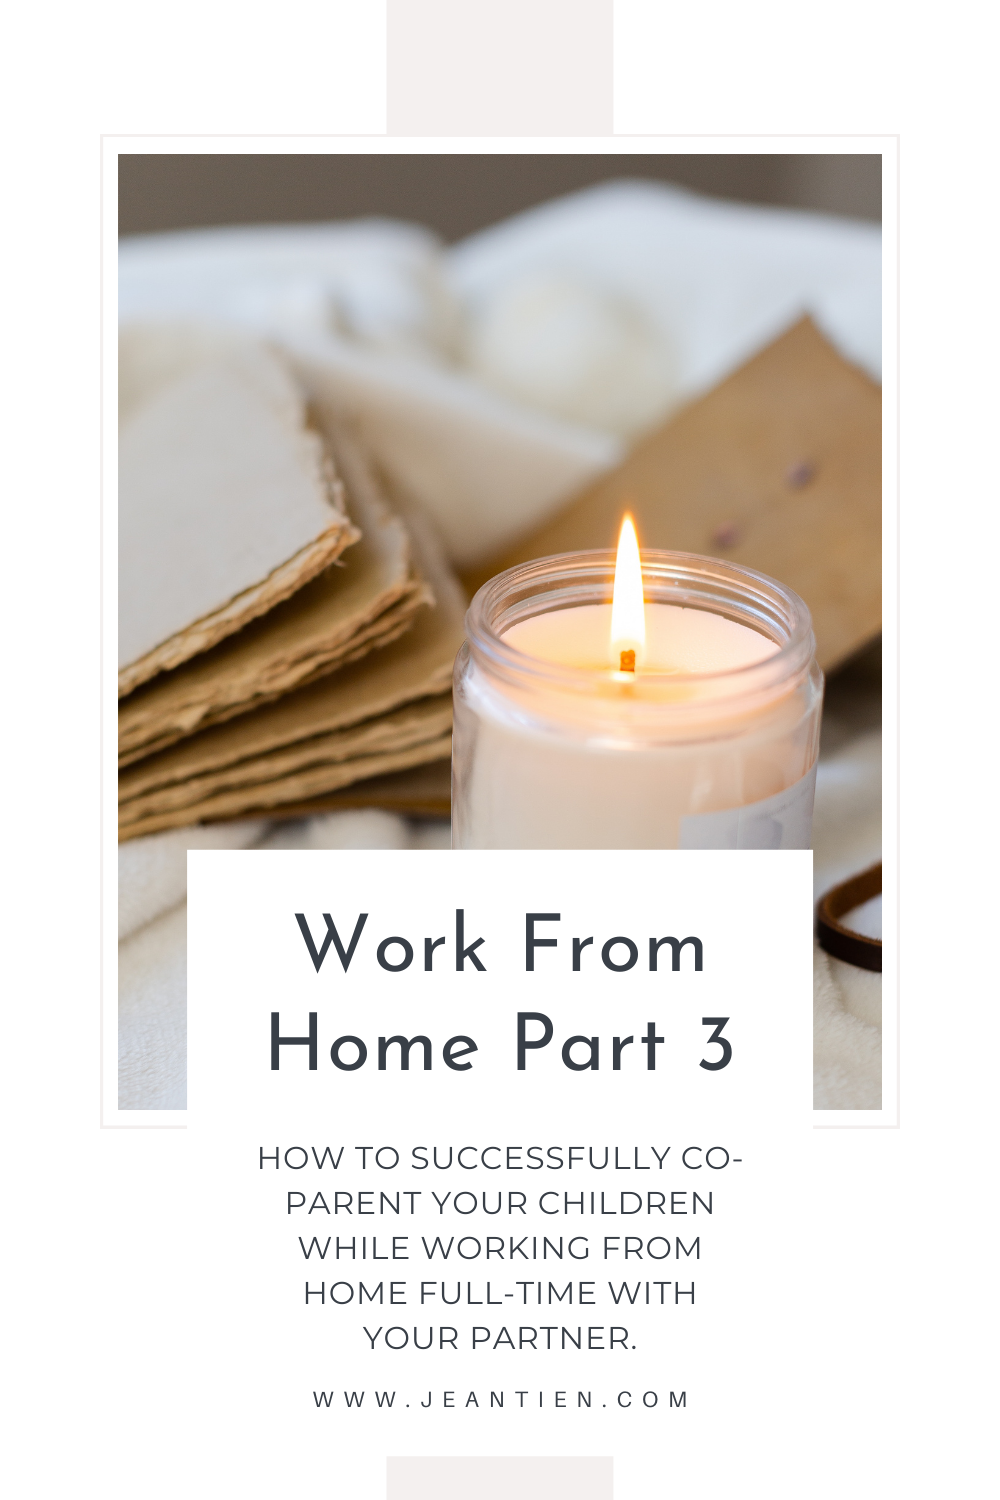 Work From Home Part 3 Blog Post